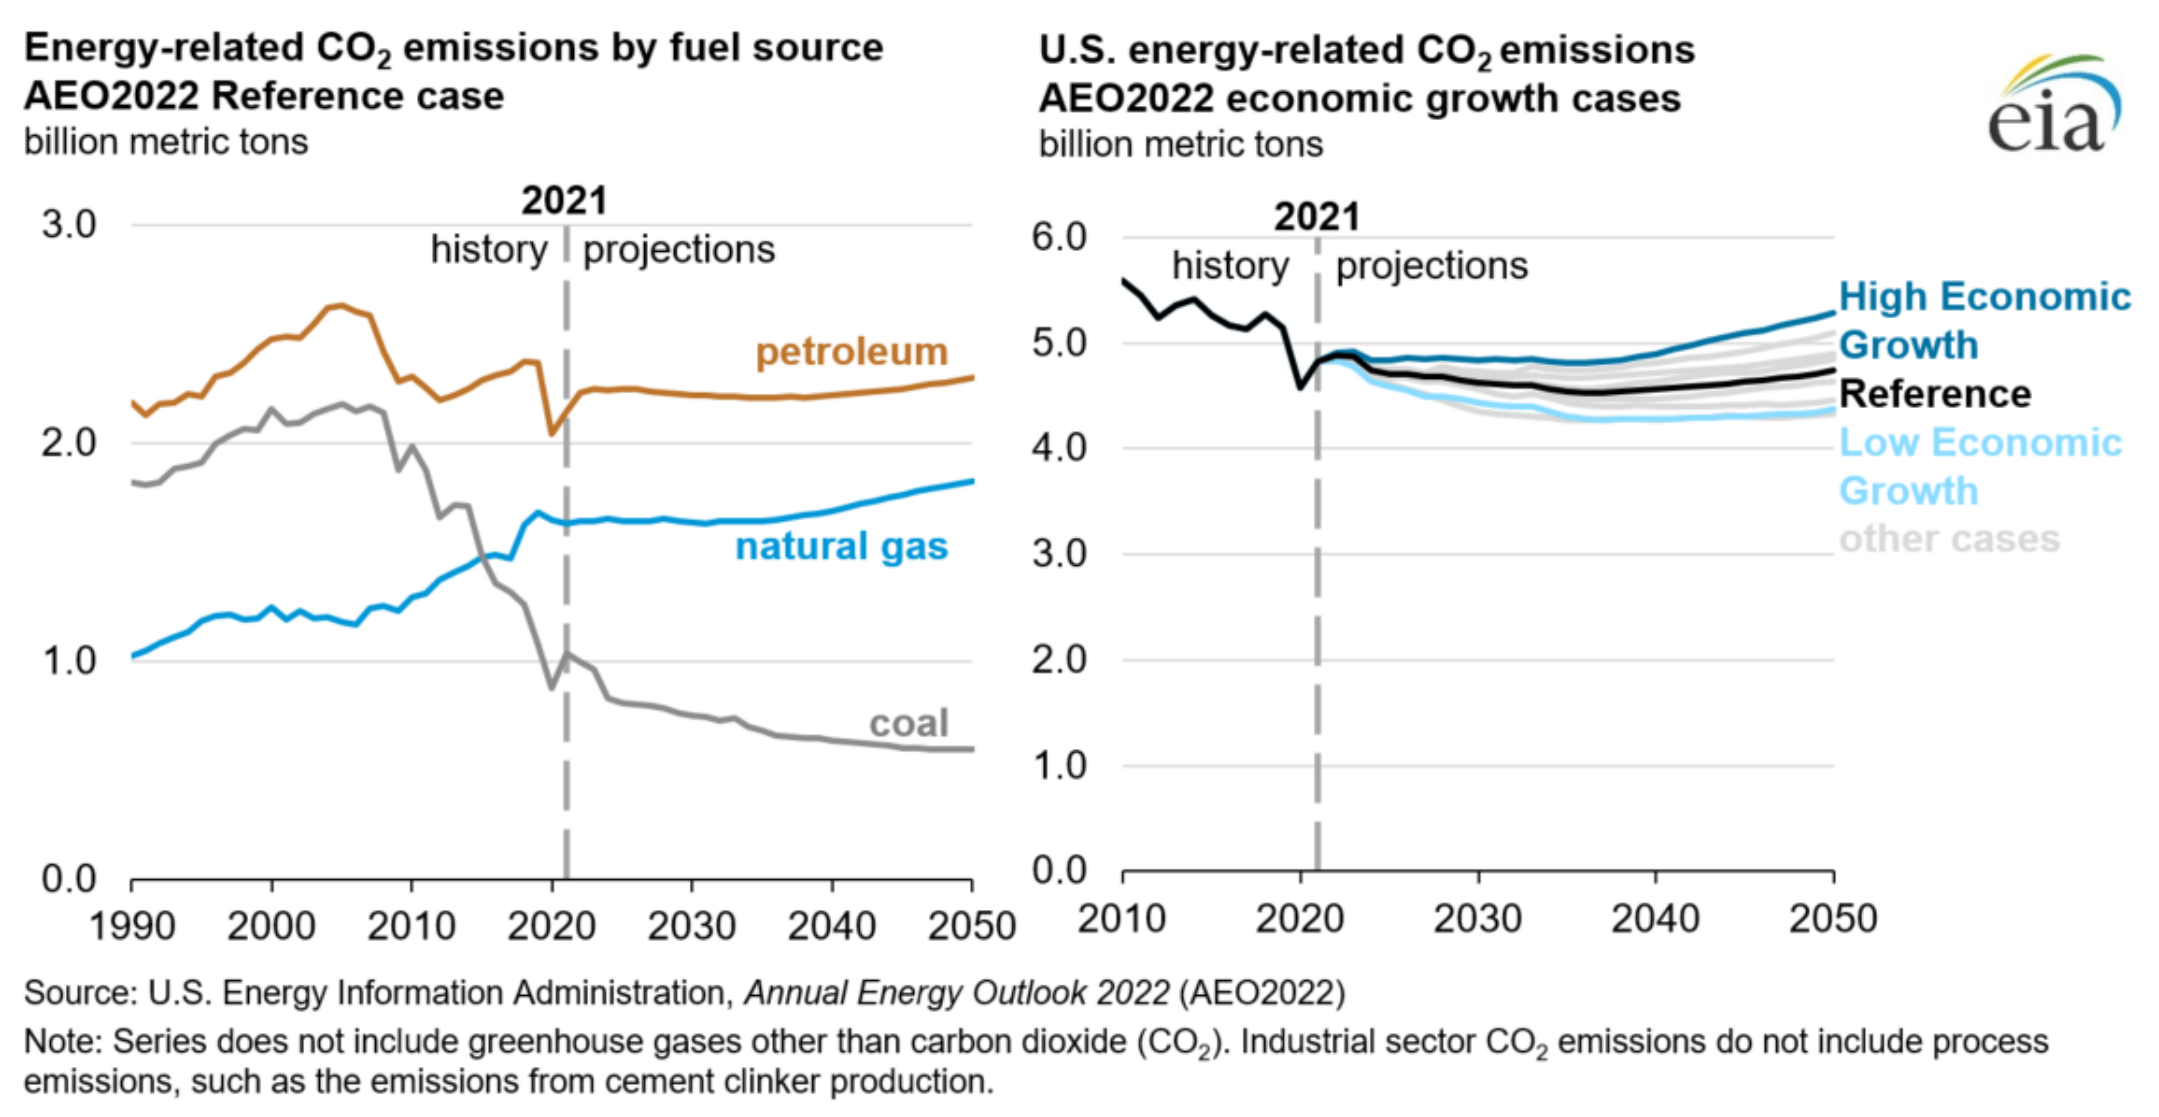 Projected U.S. energy-related carbon dioxide (CO2) emissions by fuel source in the AEO2022 reference case (left) and U.S. Energy-related CO2 emissions by AEO2022 economic growth cases (right). Energy‐related CO2 emissions dip through 2035 before climbing in later projection years. Graphic: EIA